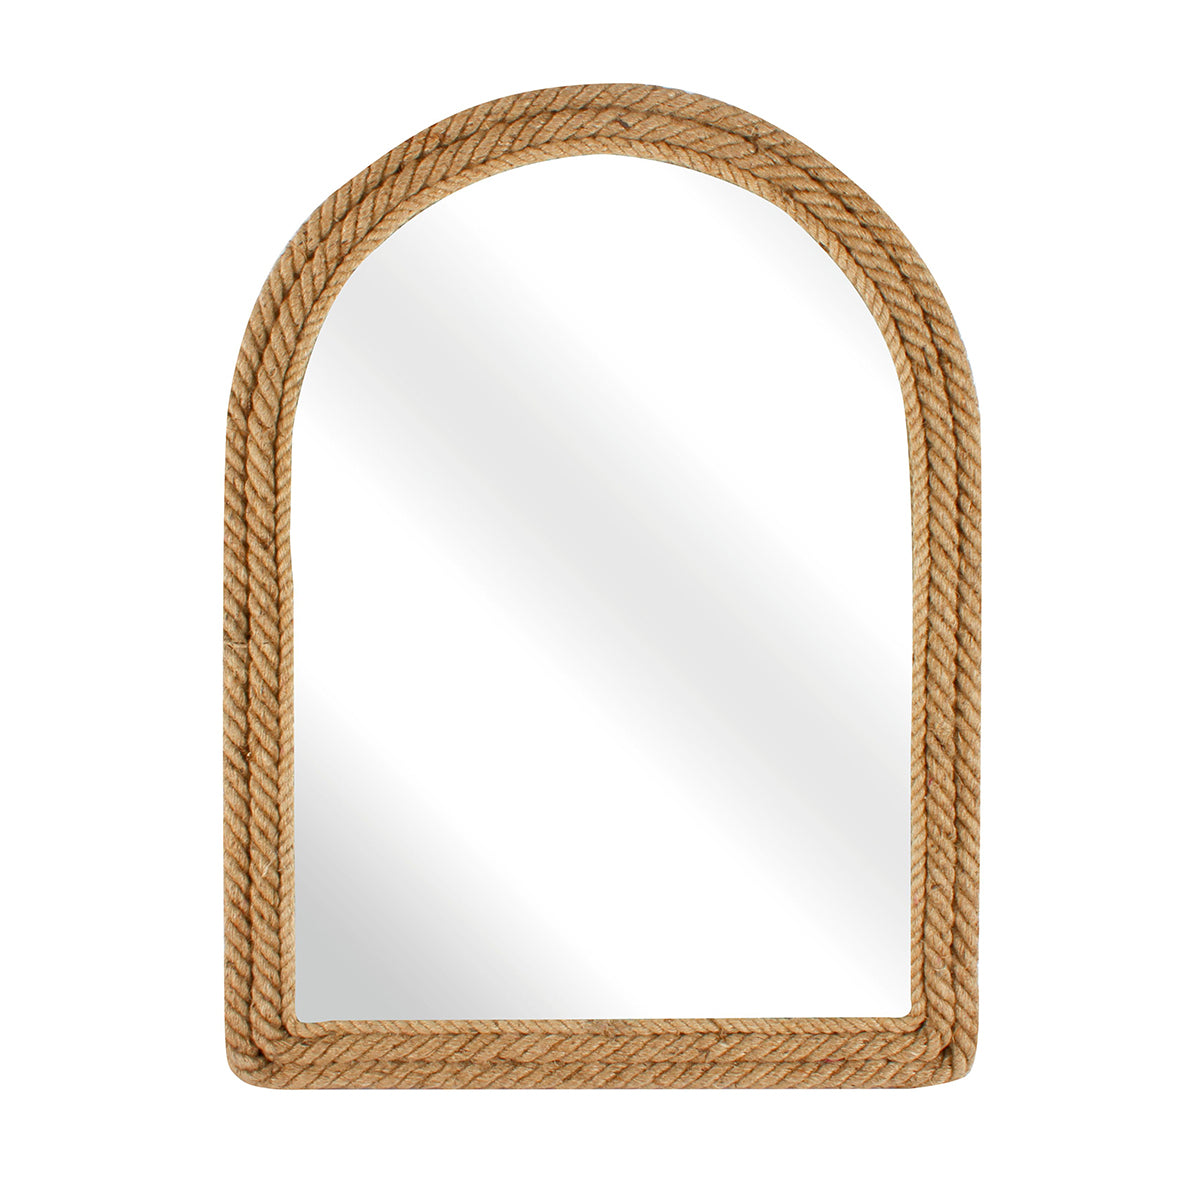 HOSHI NATURAL JUTE ARCHED MIRROR 61 X 45cm